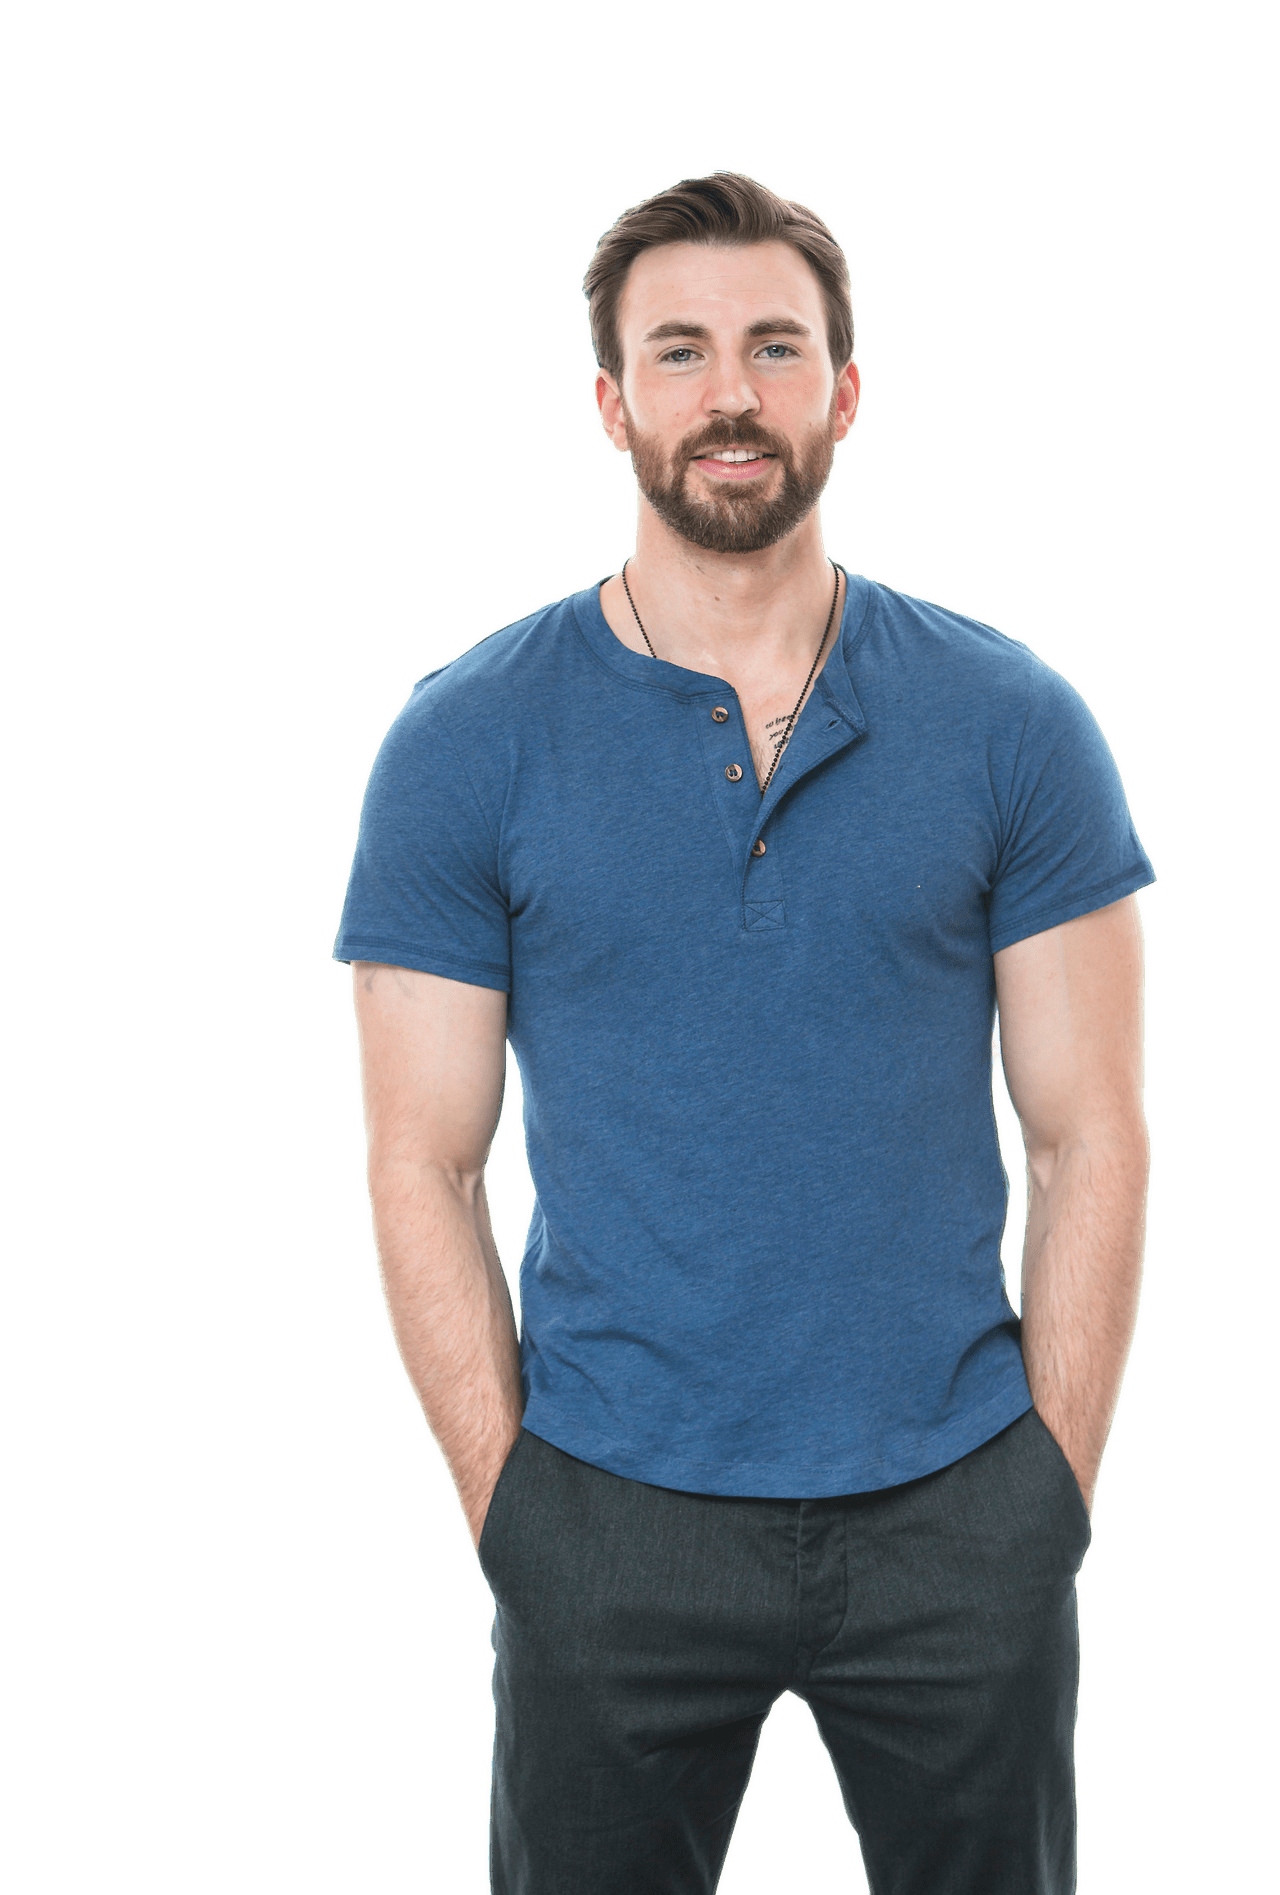 Chris Evans PNG by lucymgomez